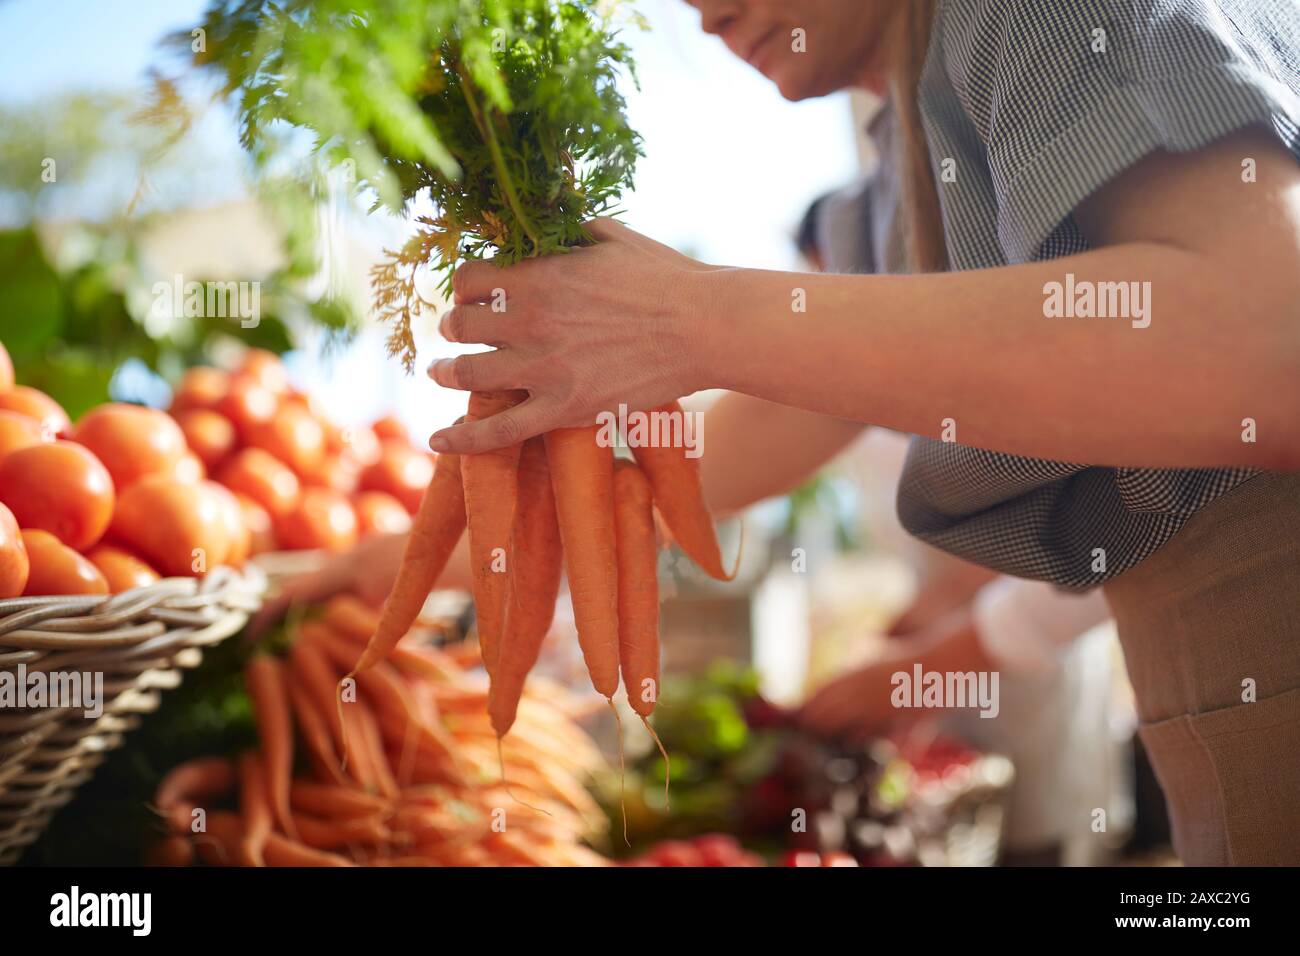 Woman holding bunch of carrots at farmer’s market Stock Photo